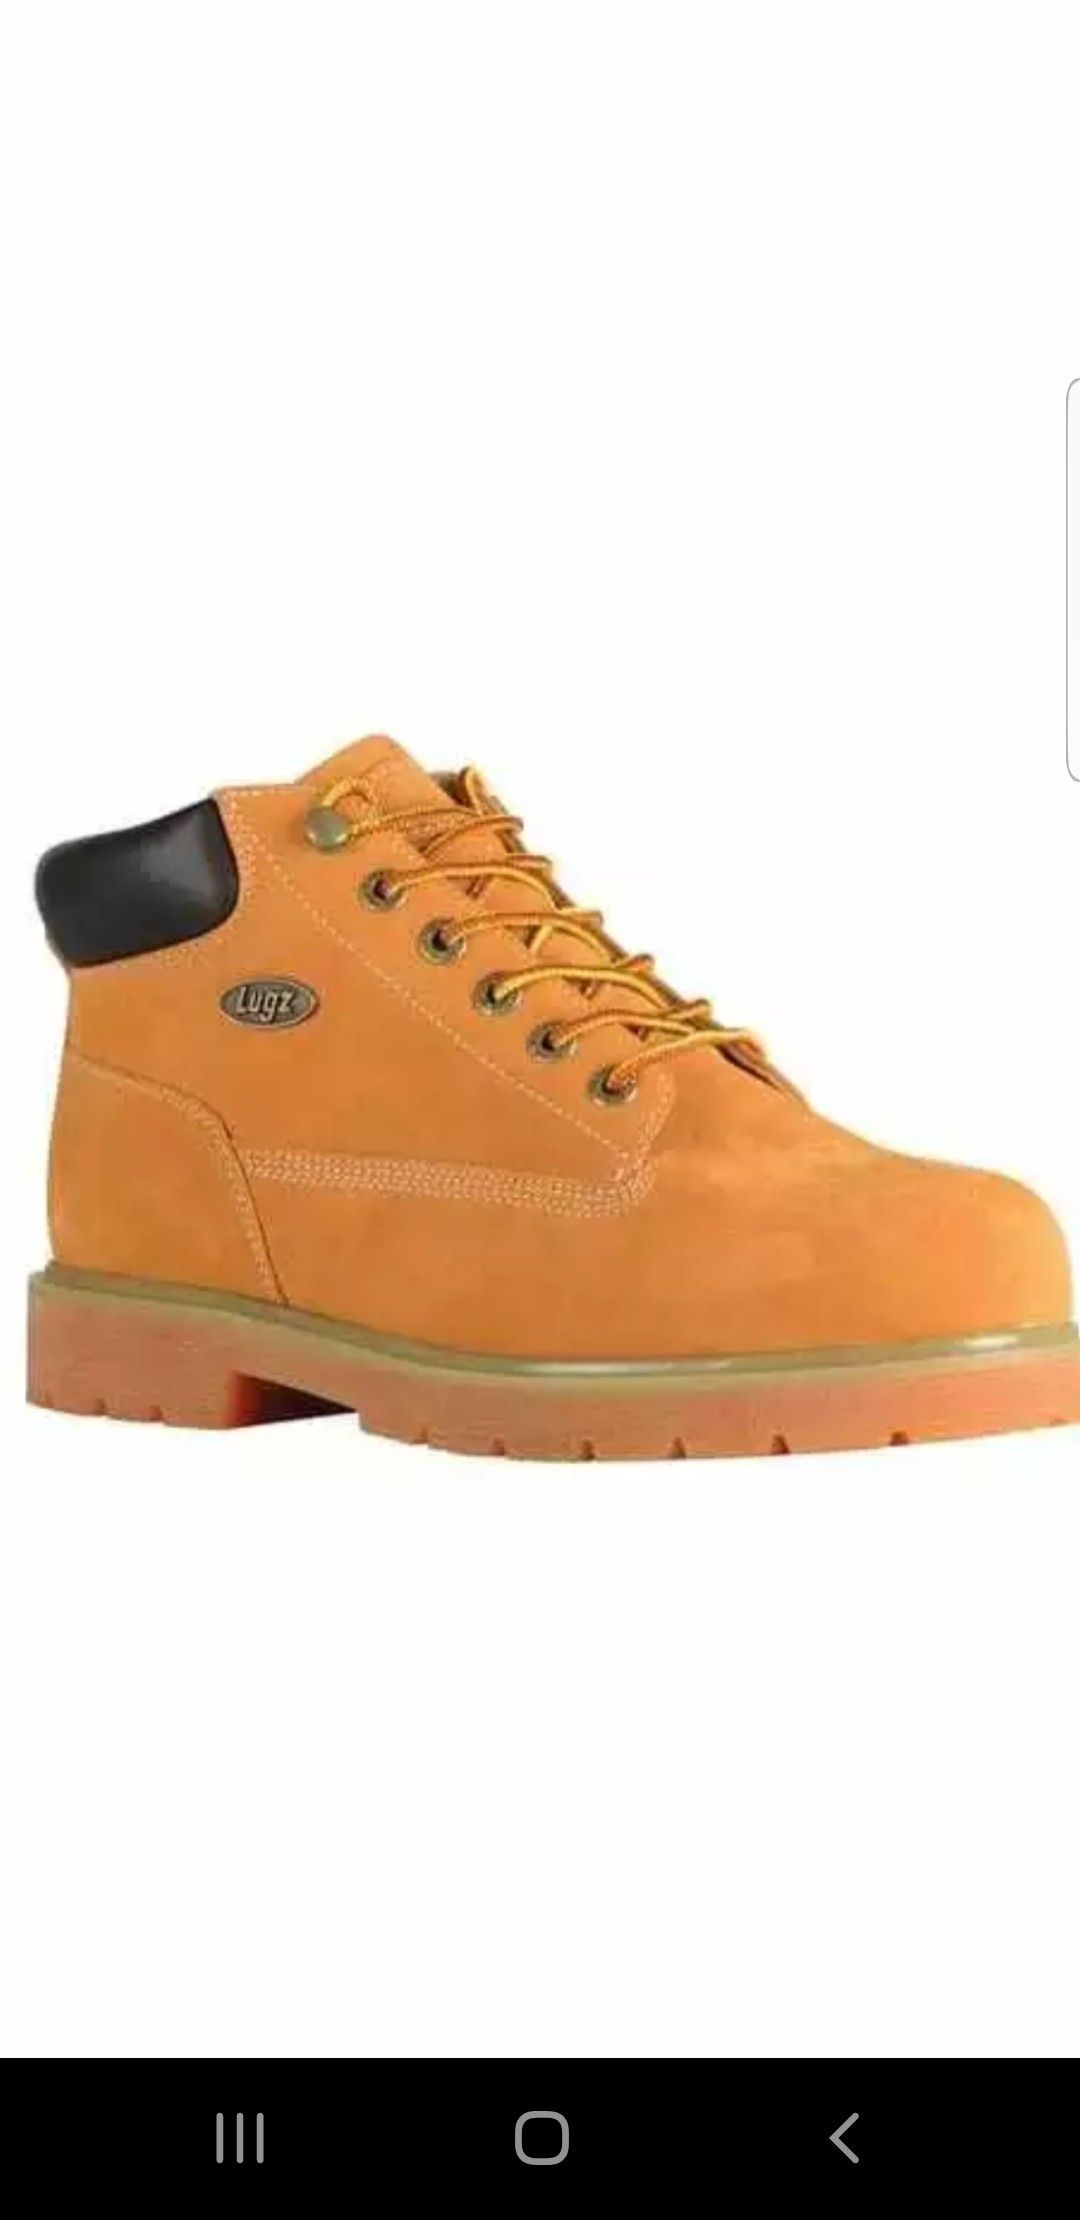 LUGZ WORK BOOTS NEW ALL SIZE AVAILABLE ONLY 45